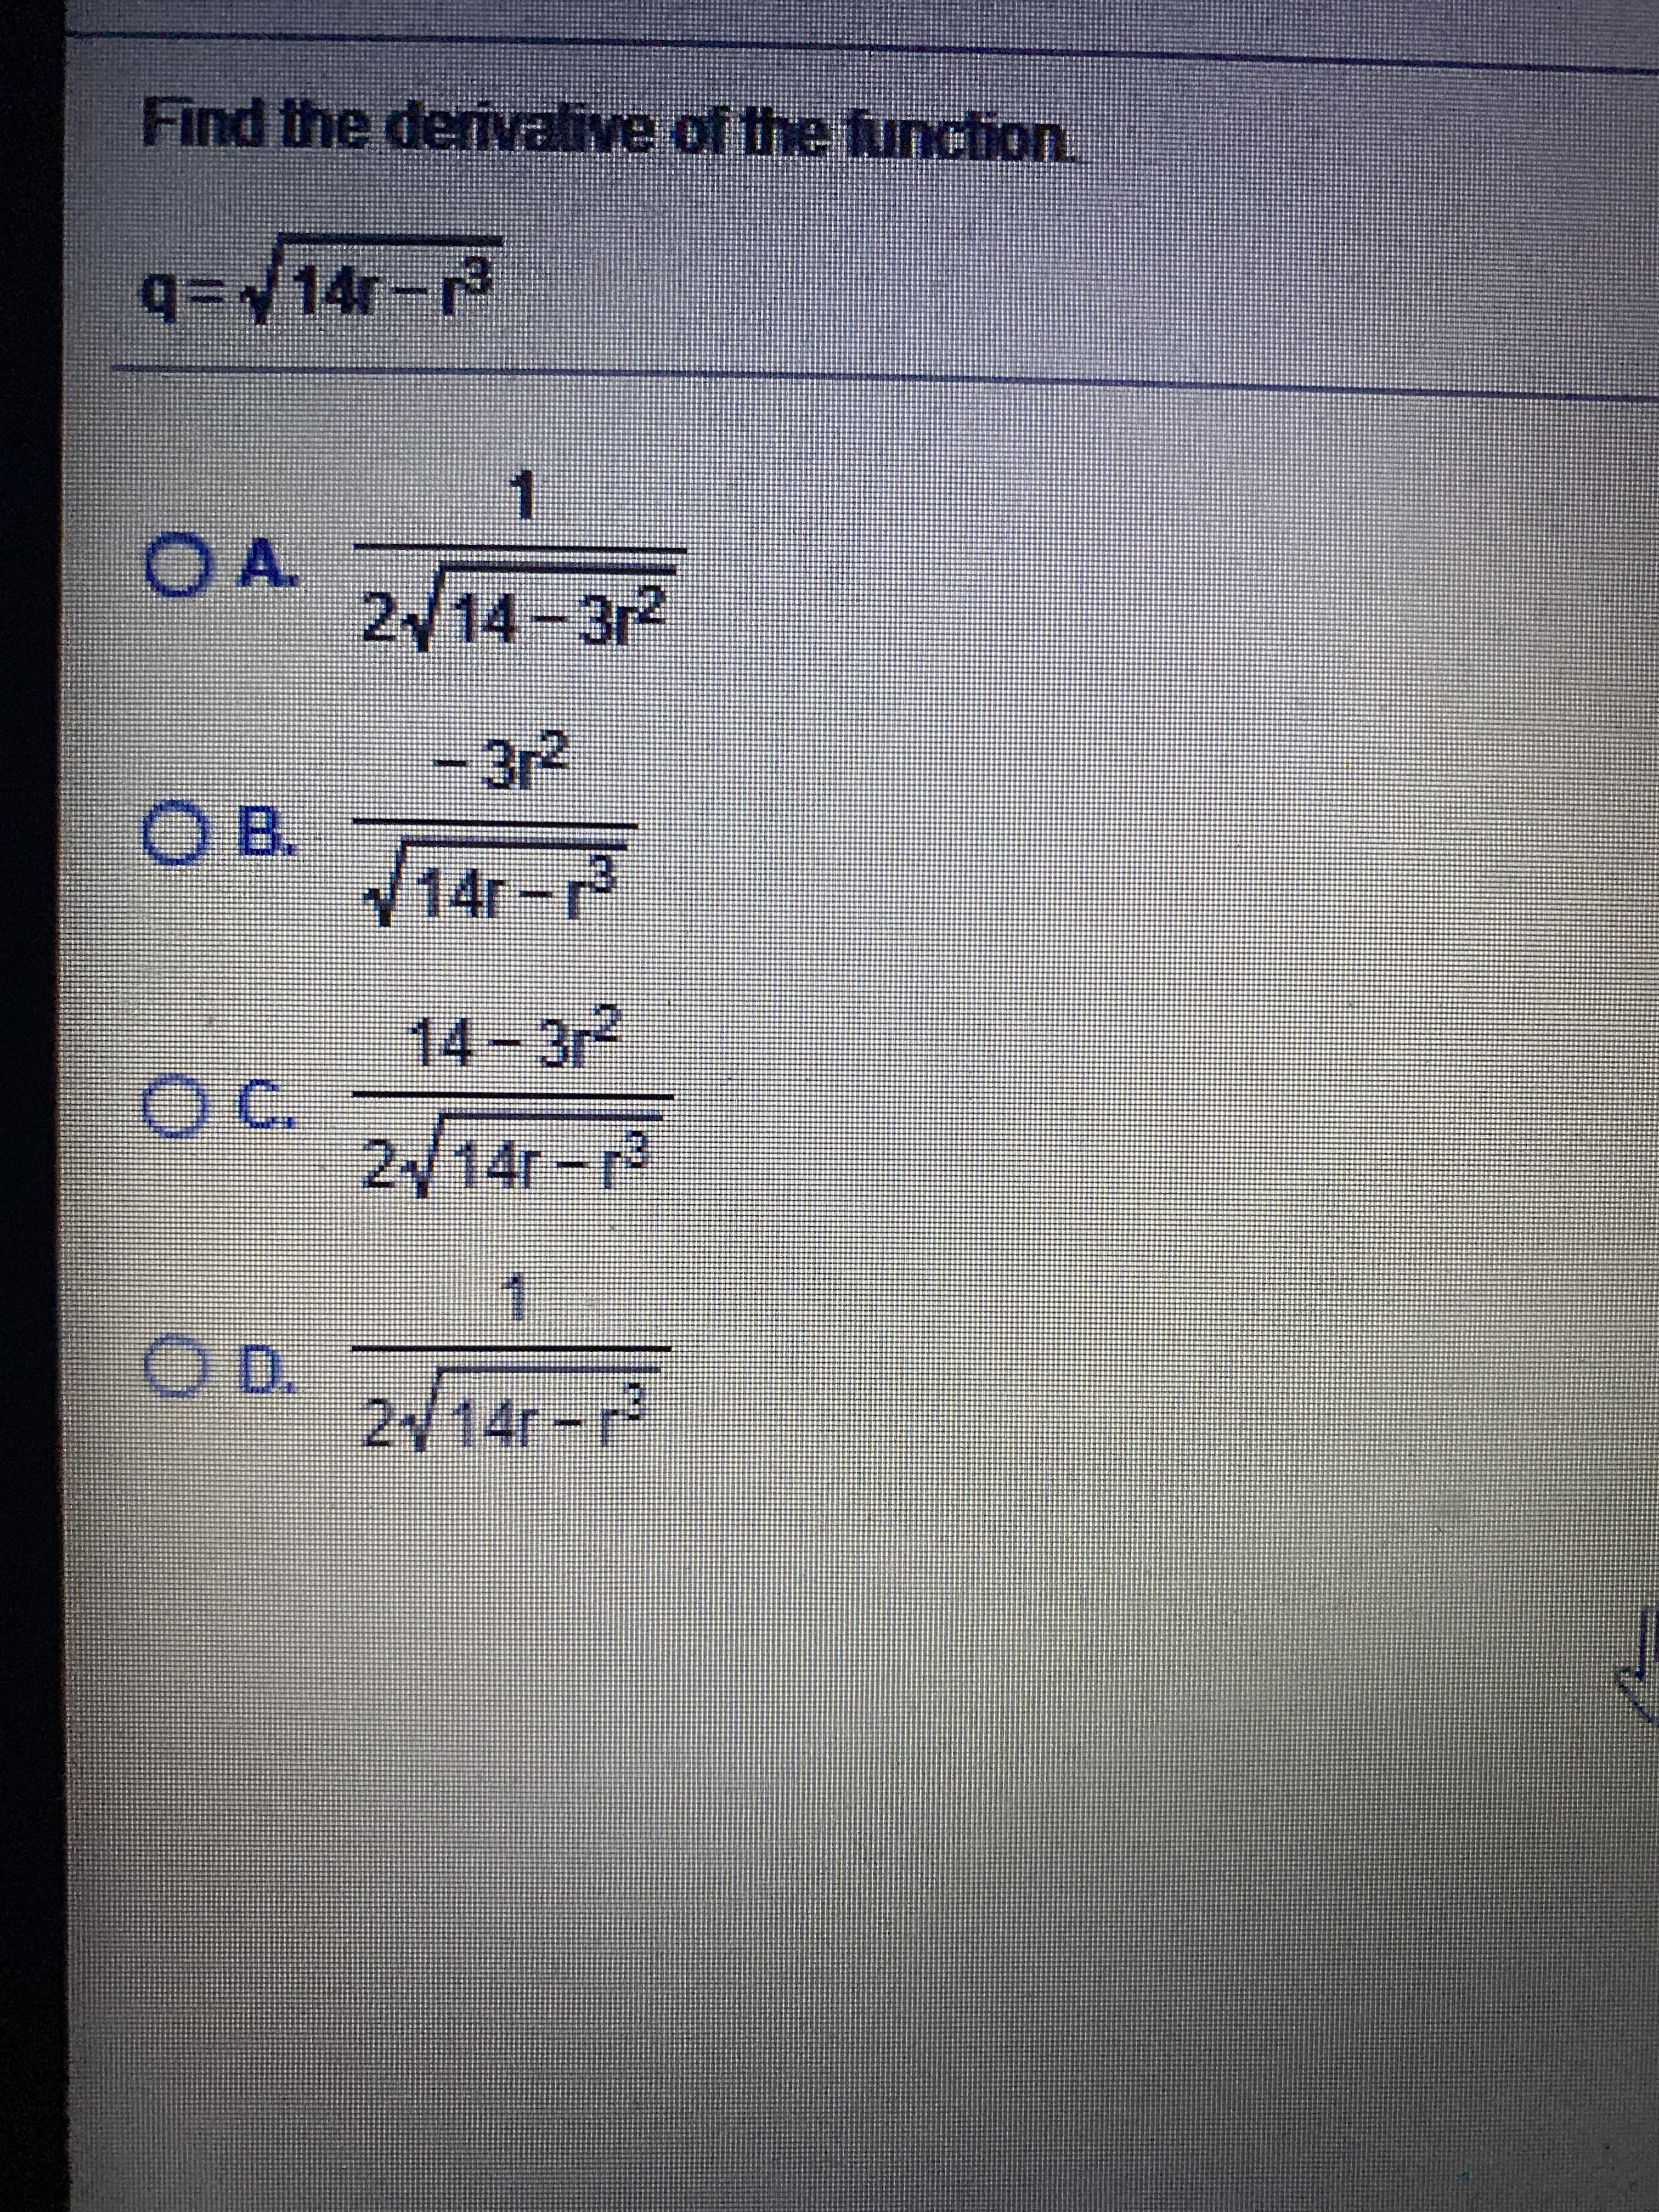 Find the derivative of the function
q=14r-
